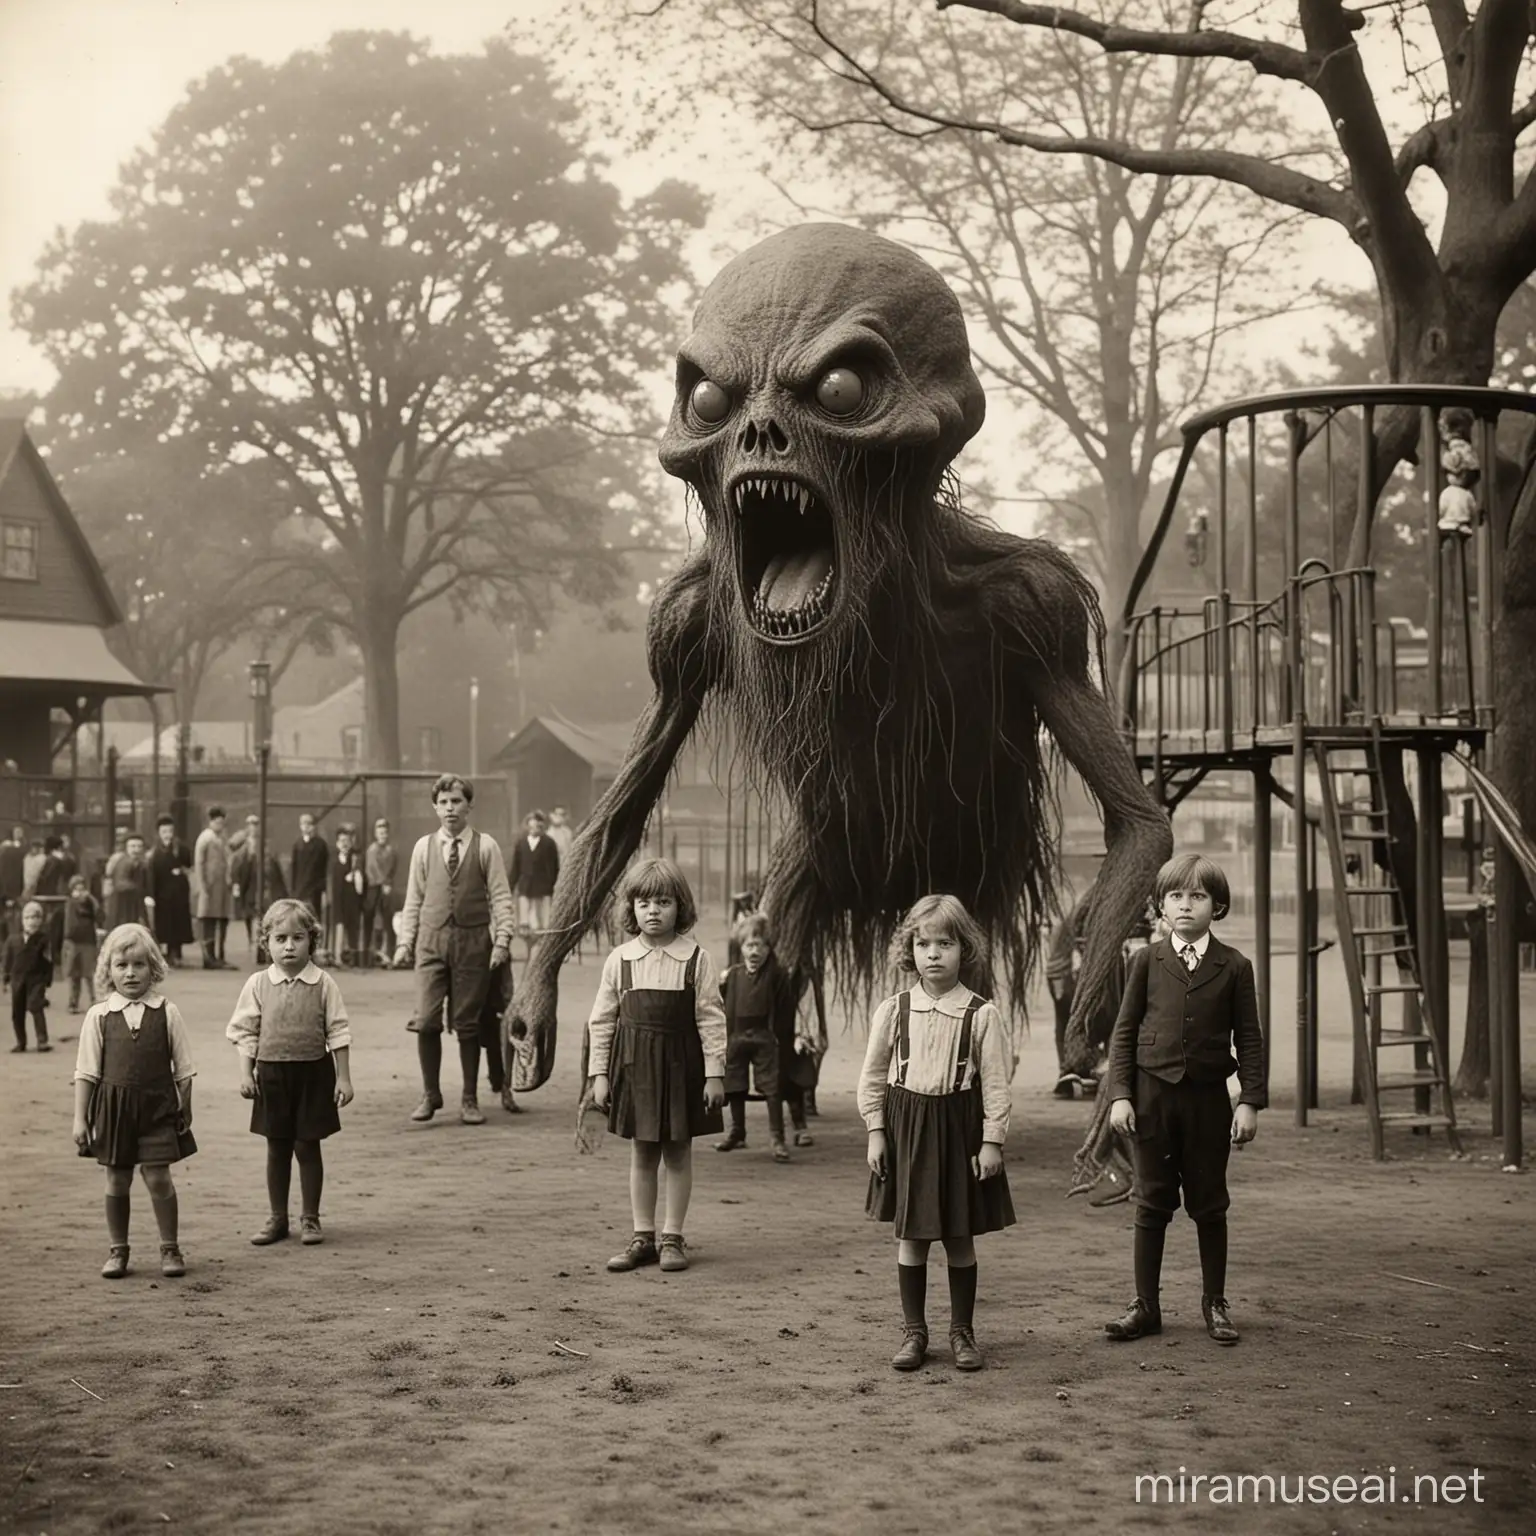 1920s Children Playing on Playground with Ominous Eldritch Presence